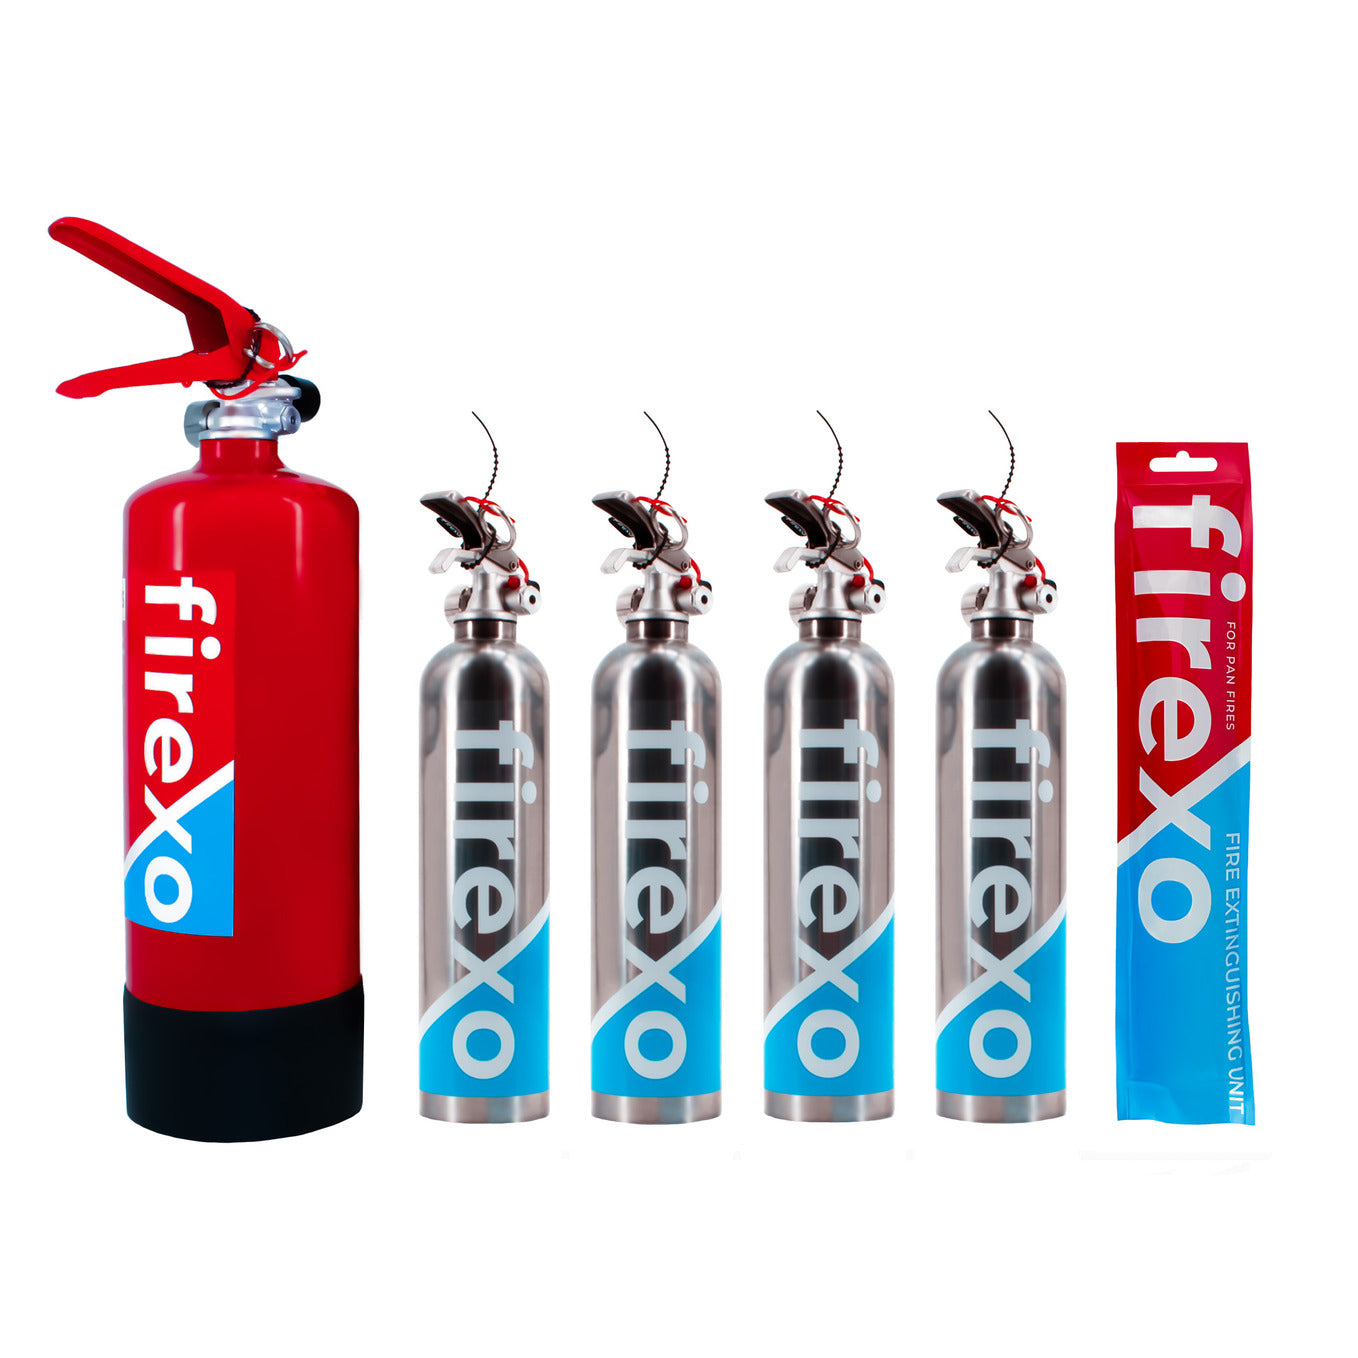 Firexo Home Fire Extinguisher Pack. 6 Items